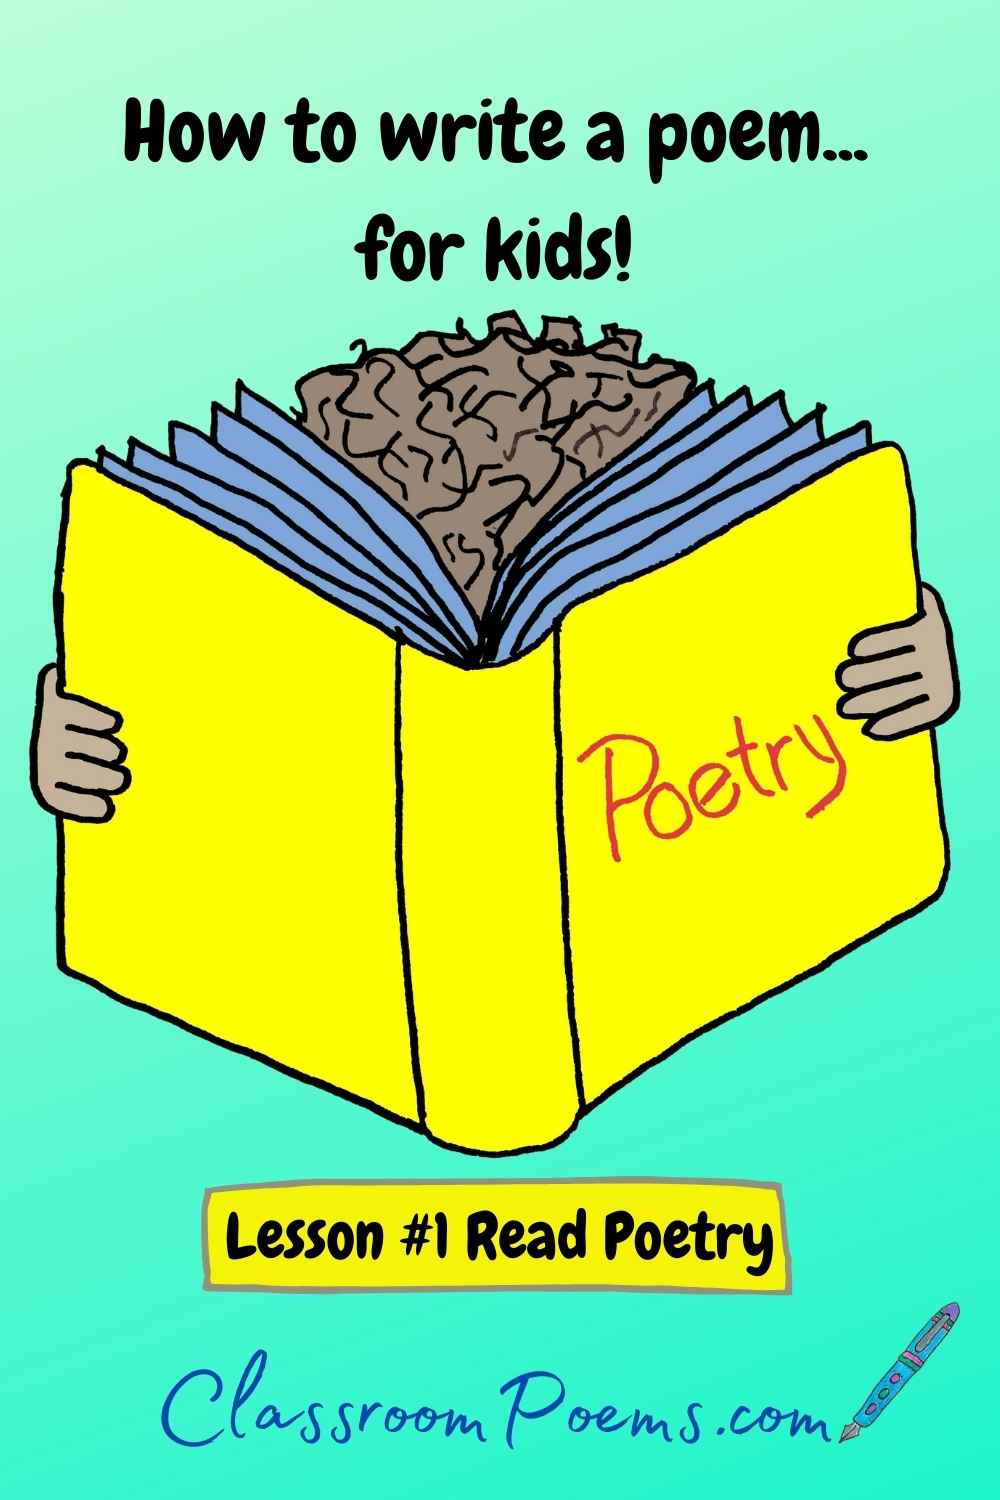 How to write poems: Lessons for Kids by Denise Rodgers on ClassroomPoems.com.